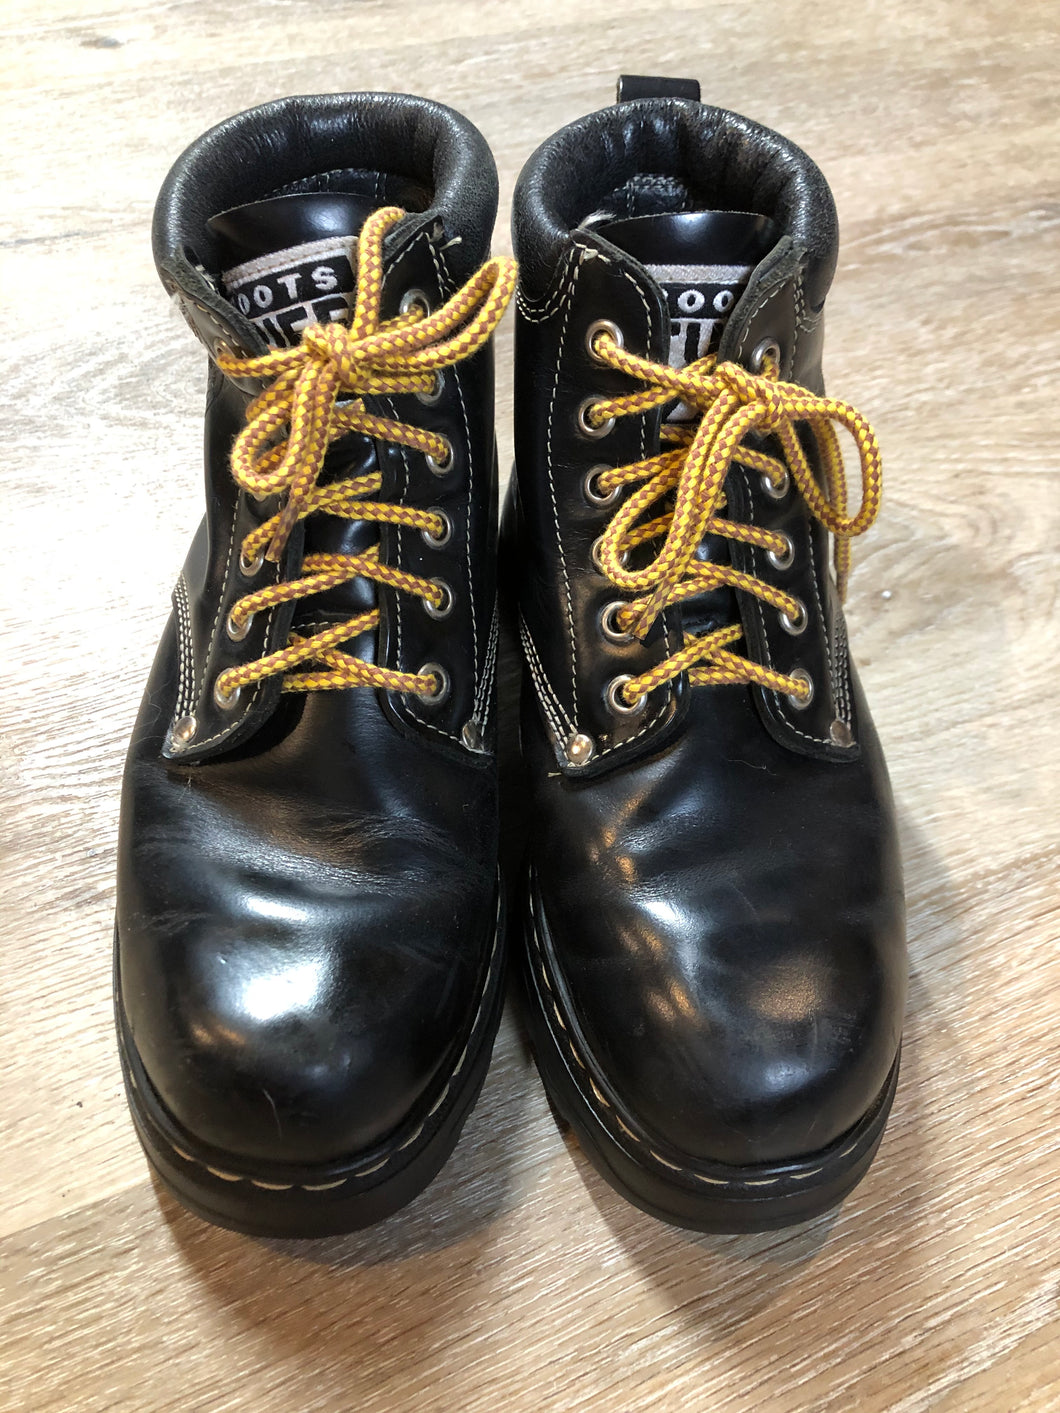 Kingspier Vintage - Roots Tuff hiking boots in black smooth leather with padded ankle and thick sole. Made in Canada.

Size 7.5 womens

The uppers and soles are in excellent condition with some minor wear.